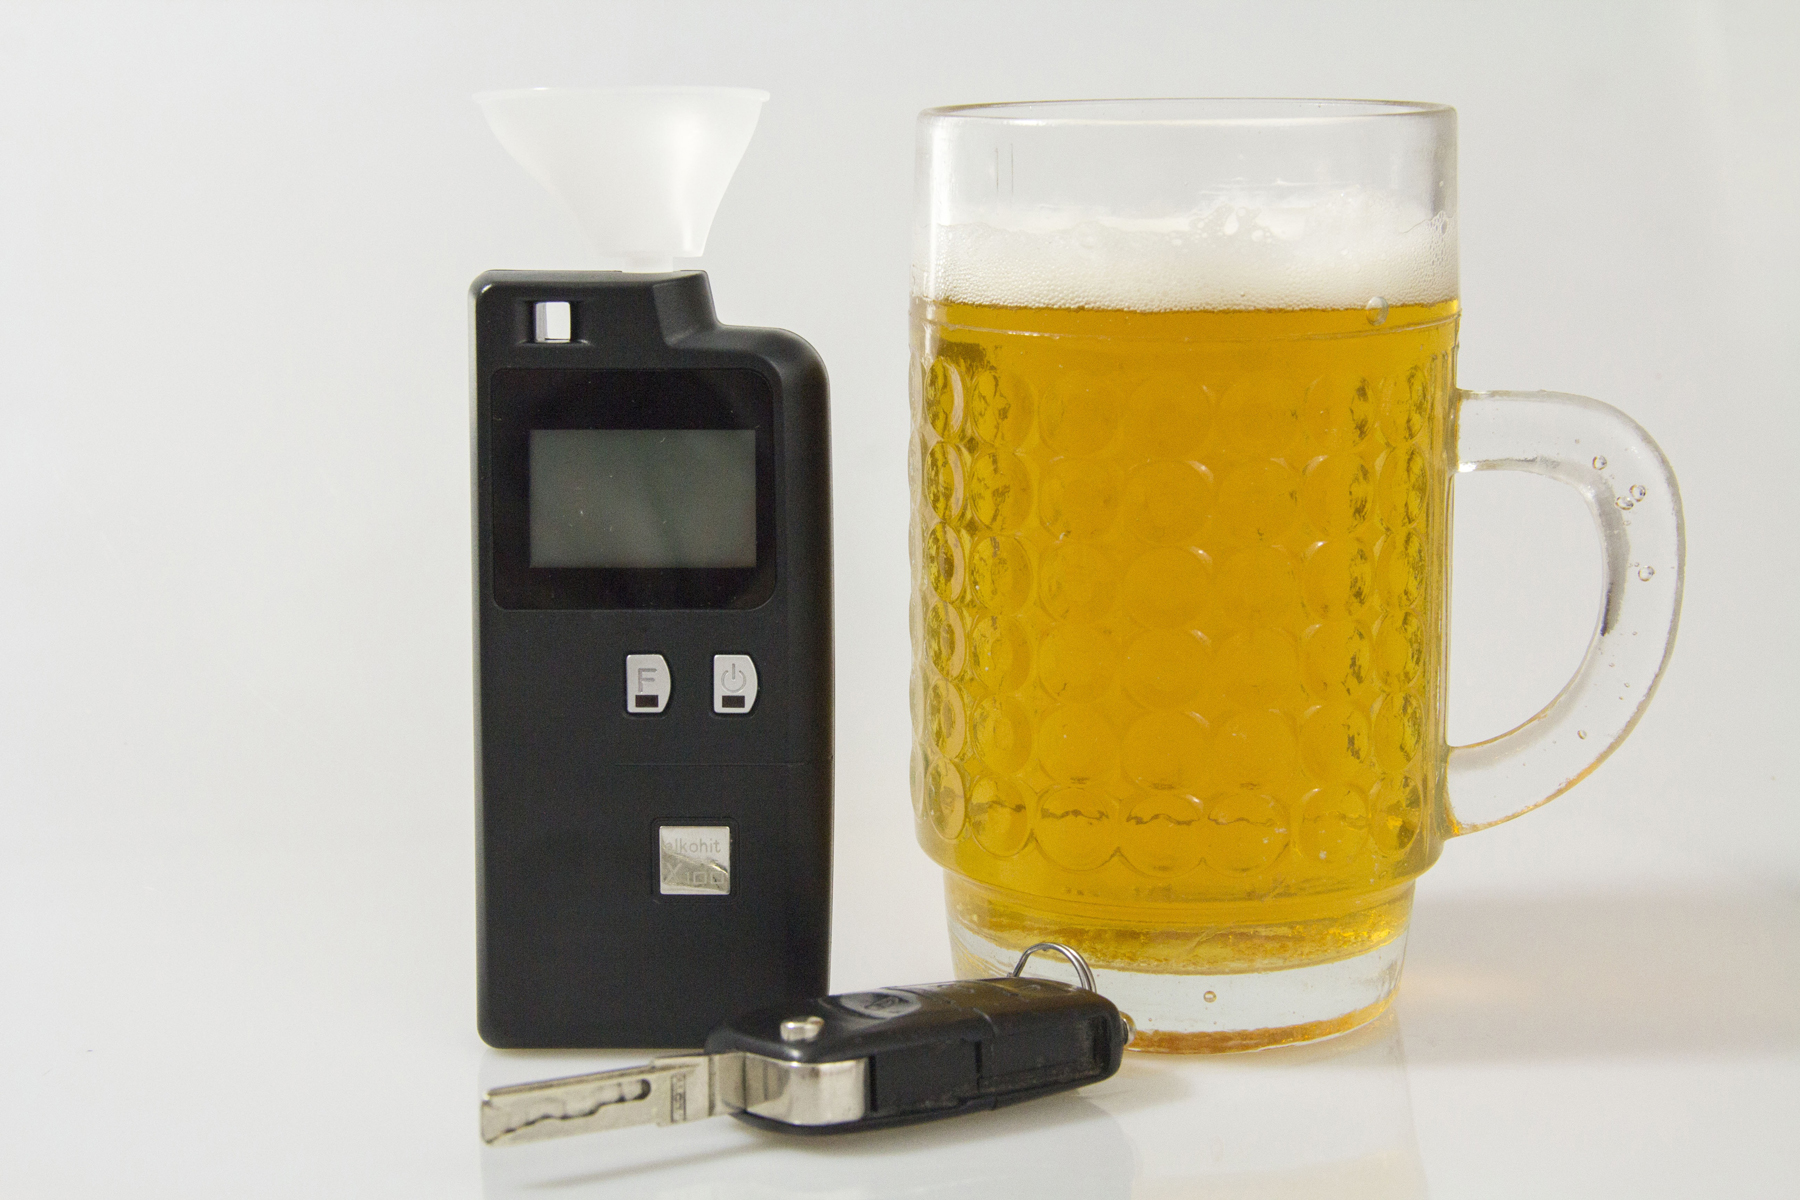 A breathalyser on a table next to a pint of beer and car keys